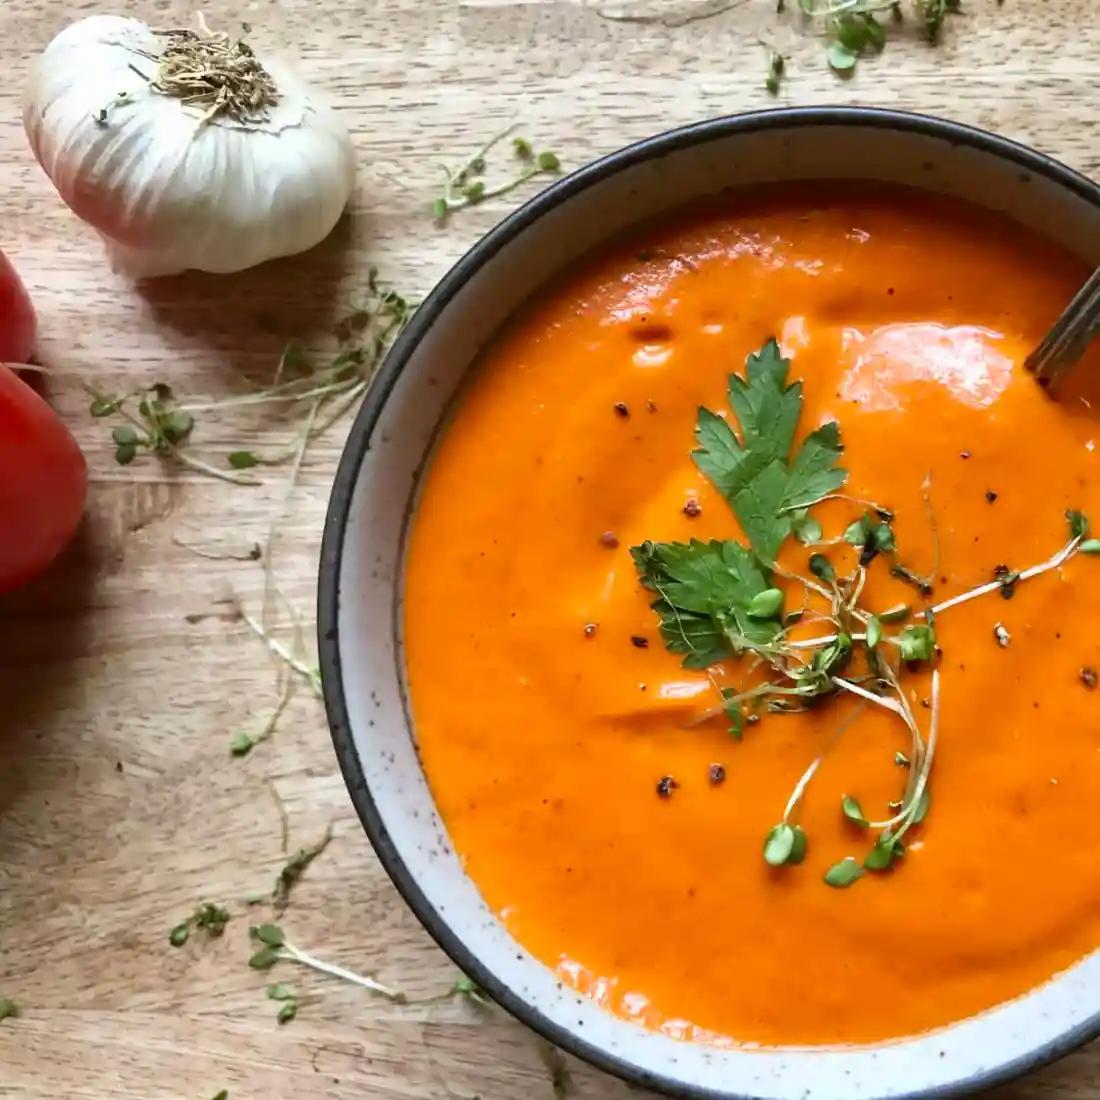 smoked red pepper sauce - What is red pepper sauce made of